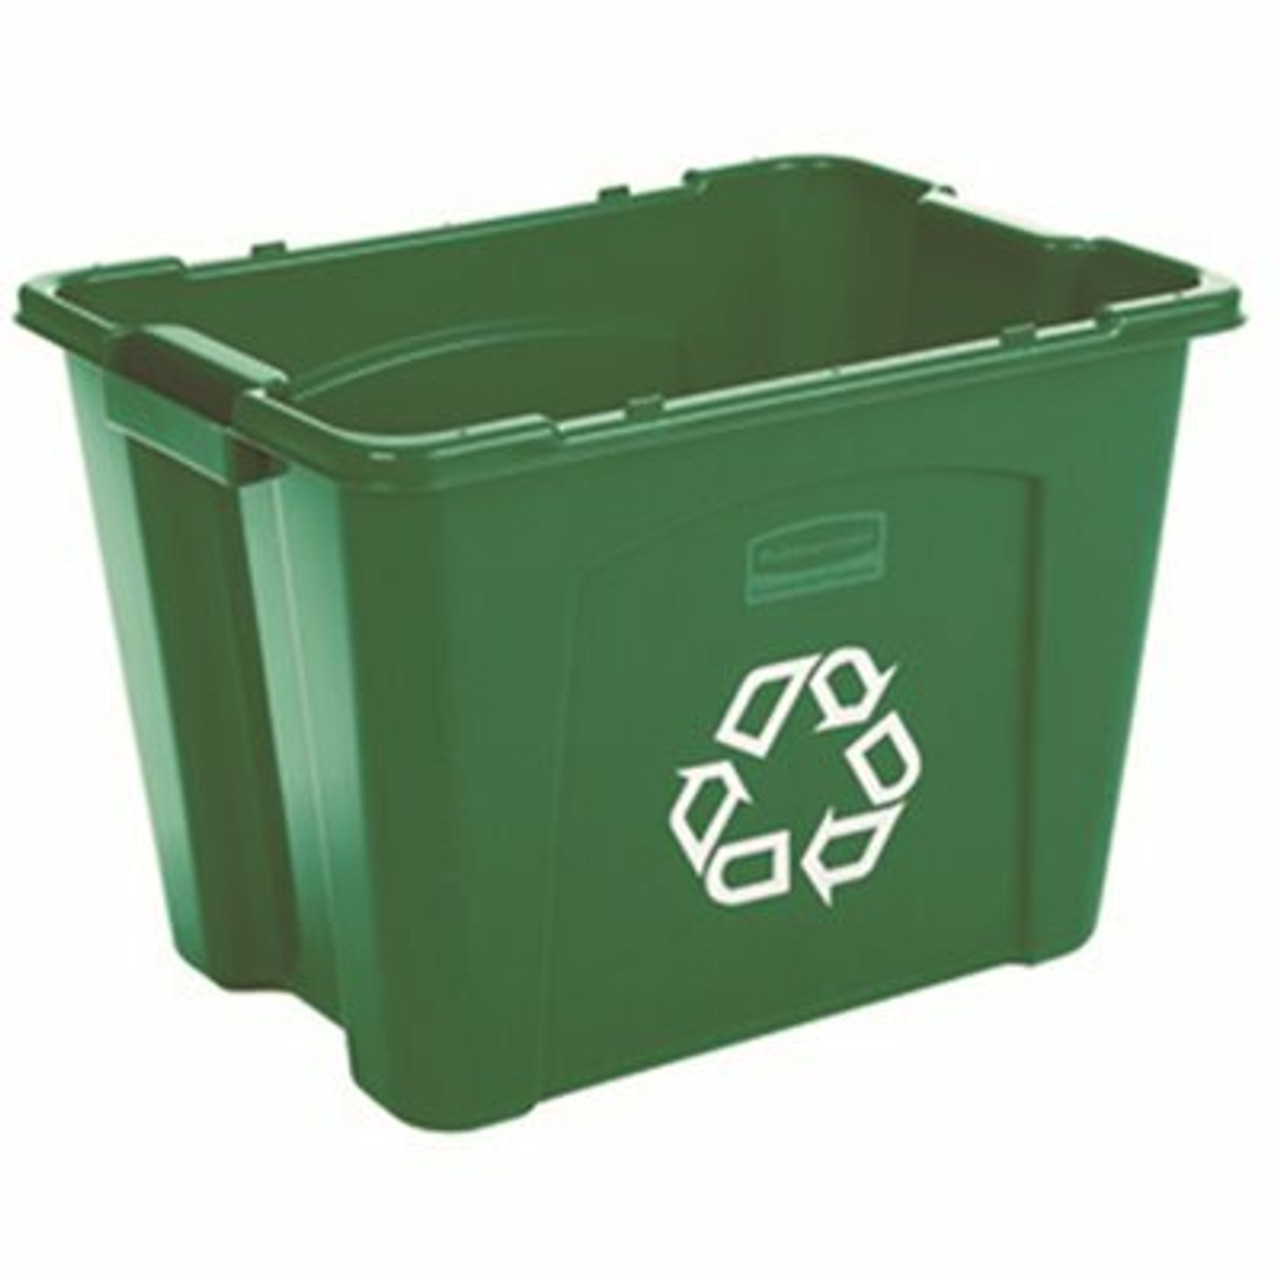 Rubbermaid Commercial Products 14 Gal. Green Recycling Bin With Universal Recycle Symbol